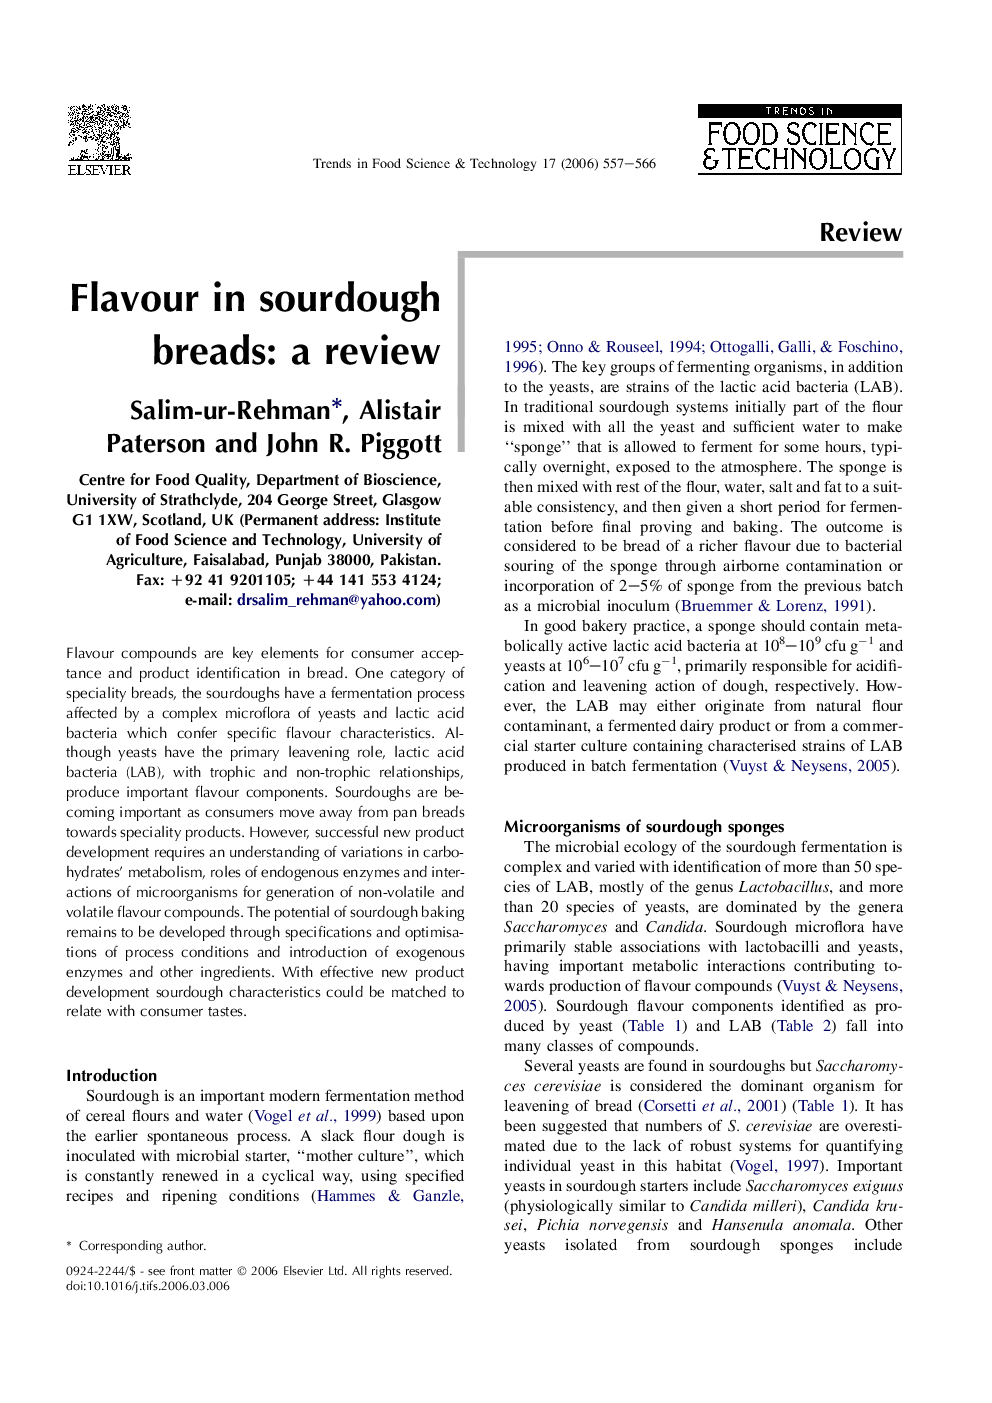 Flavour in sourdough breads: a review